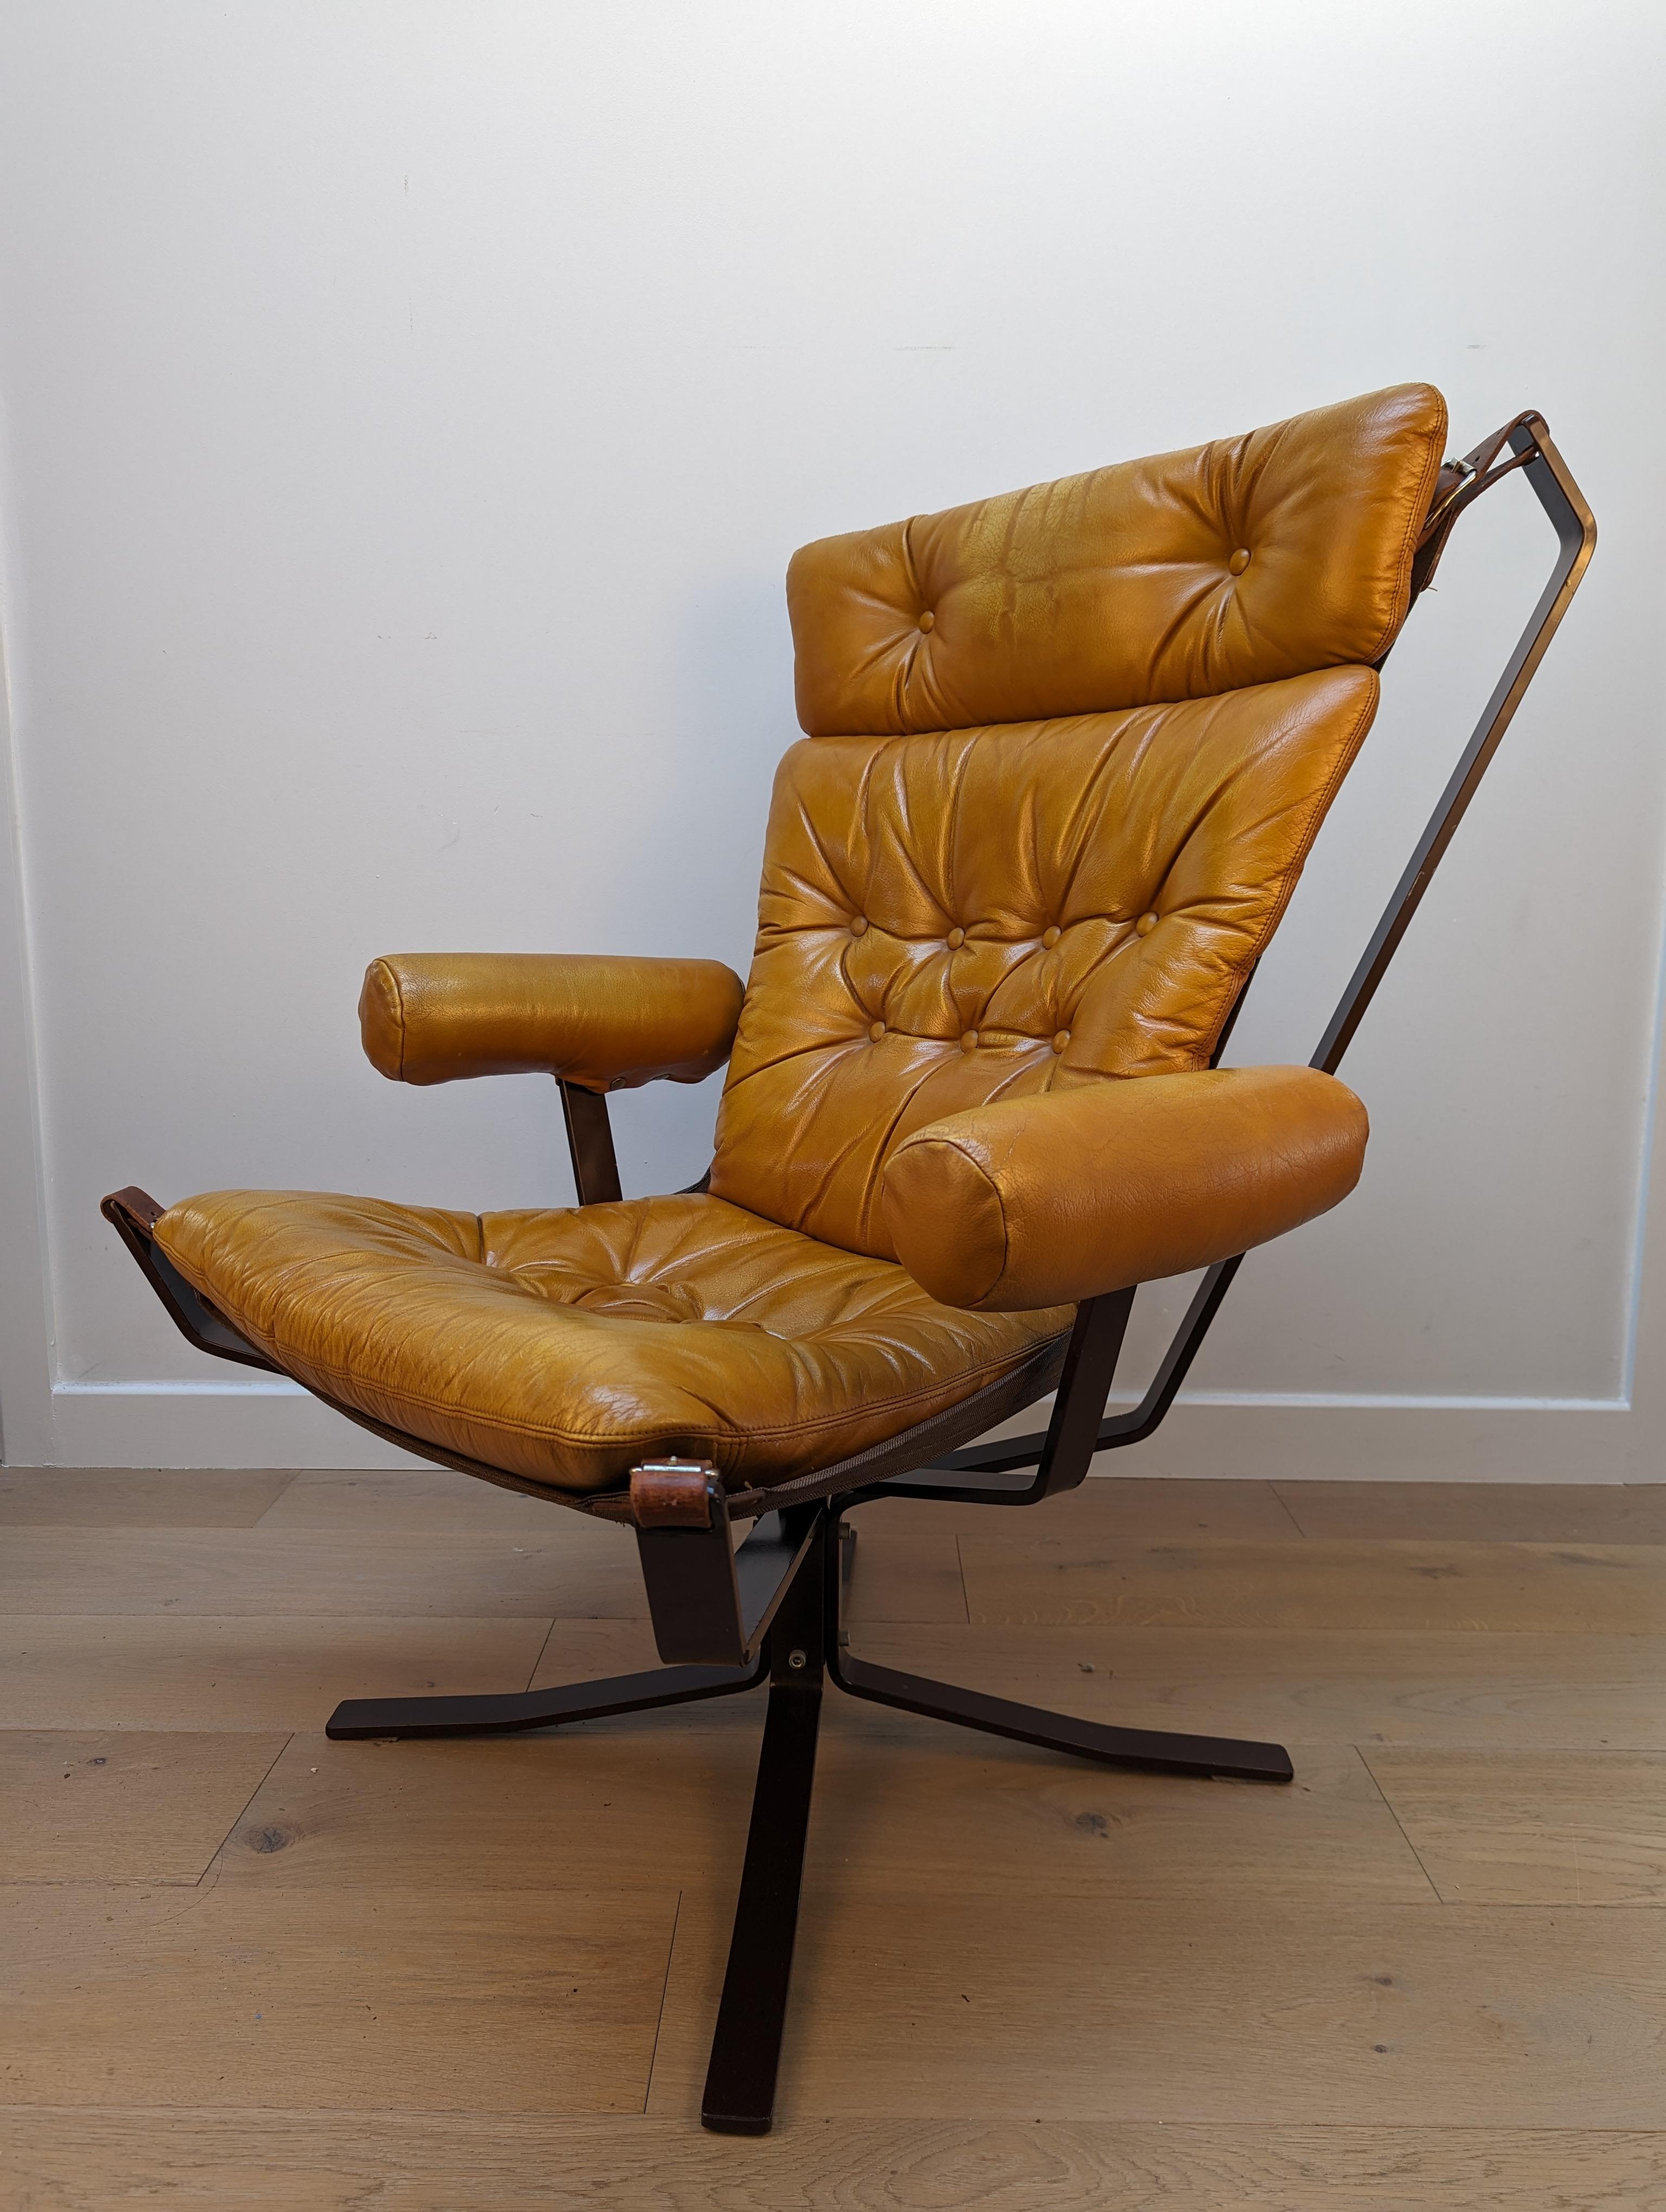 A rare ‘Superstar’ lounge set by Mid Century Danish furniture producer Trygg Mobler that was only produced in limited numbers between 1973-76.

This features tan leather upholstery, that nestled into a canvas sling support that is suspended between